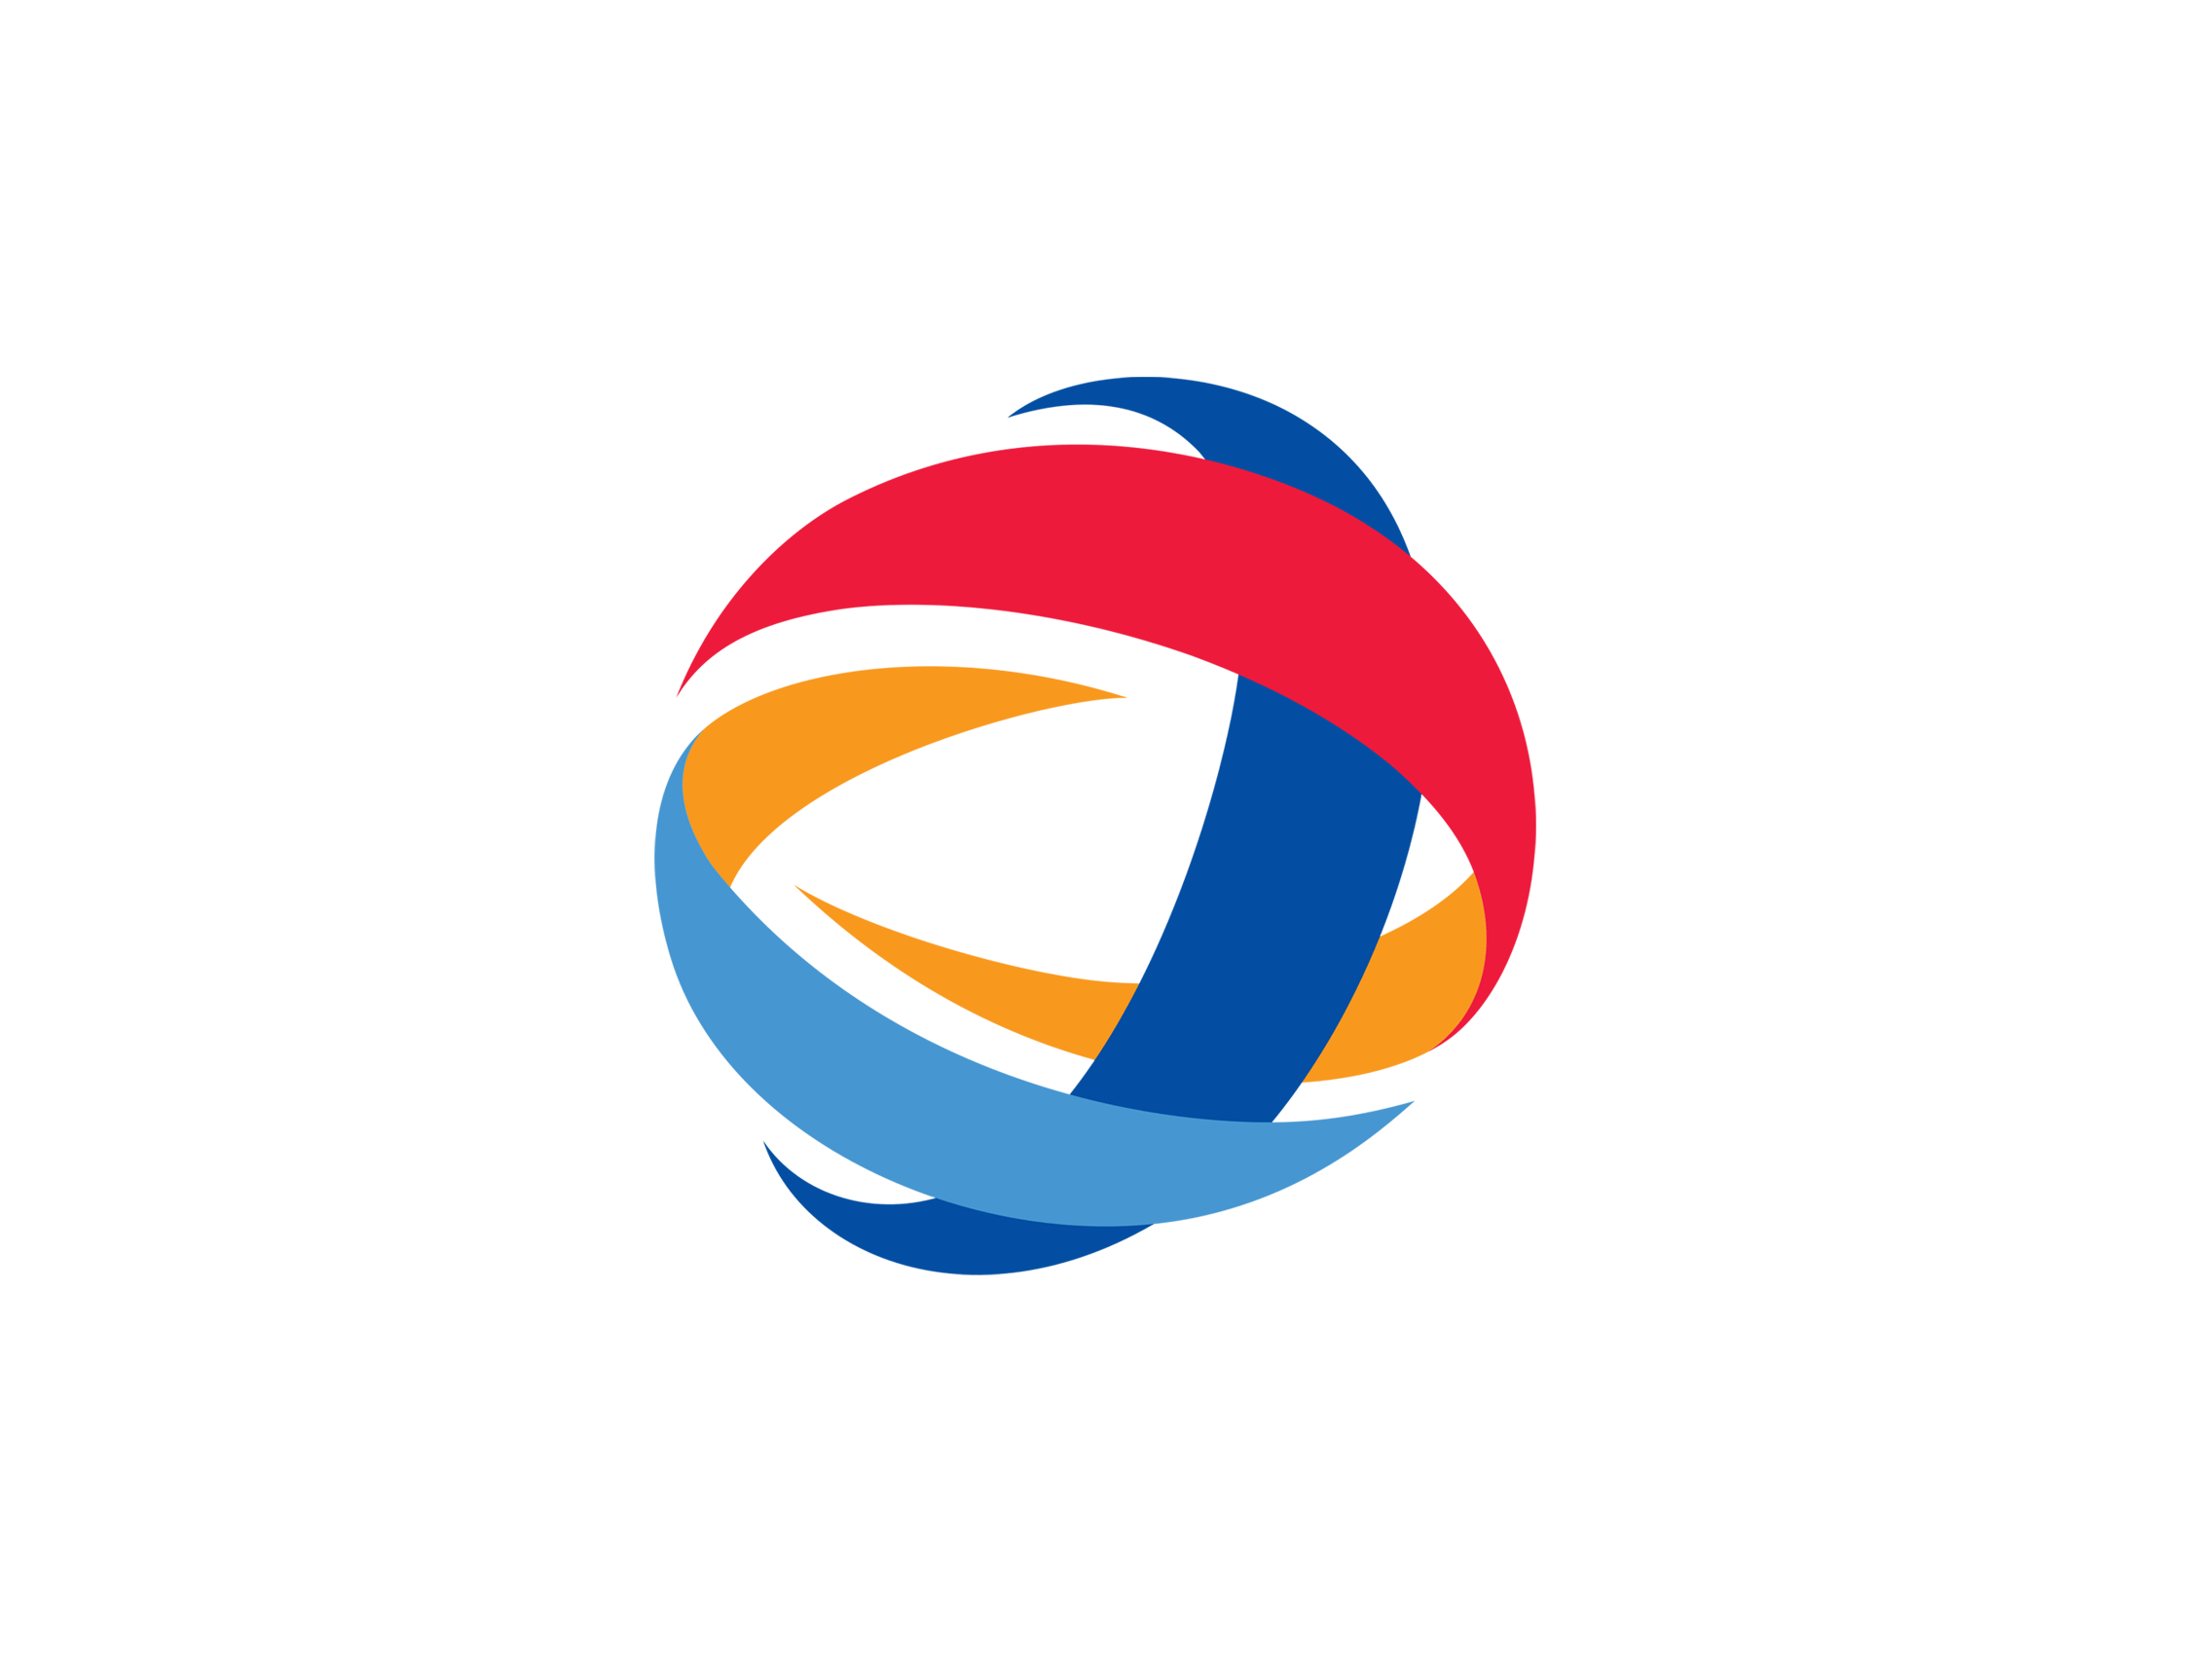 Blue Ball with Company Logo - Red blue and orange Logos